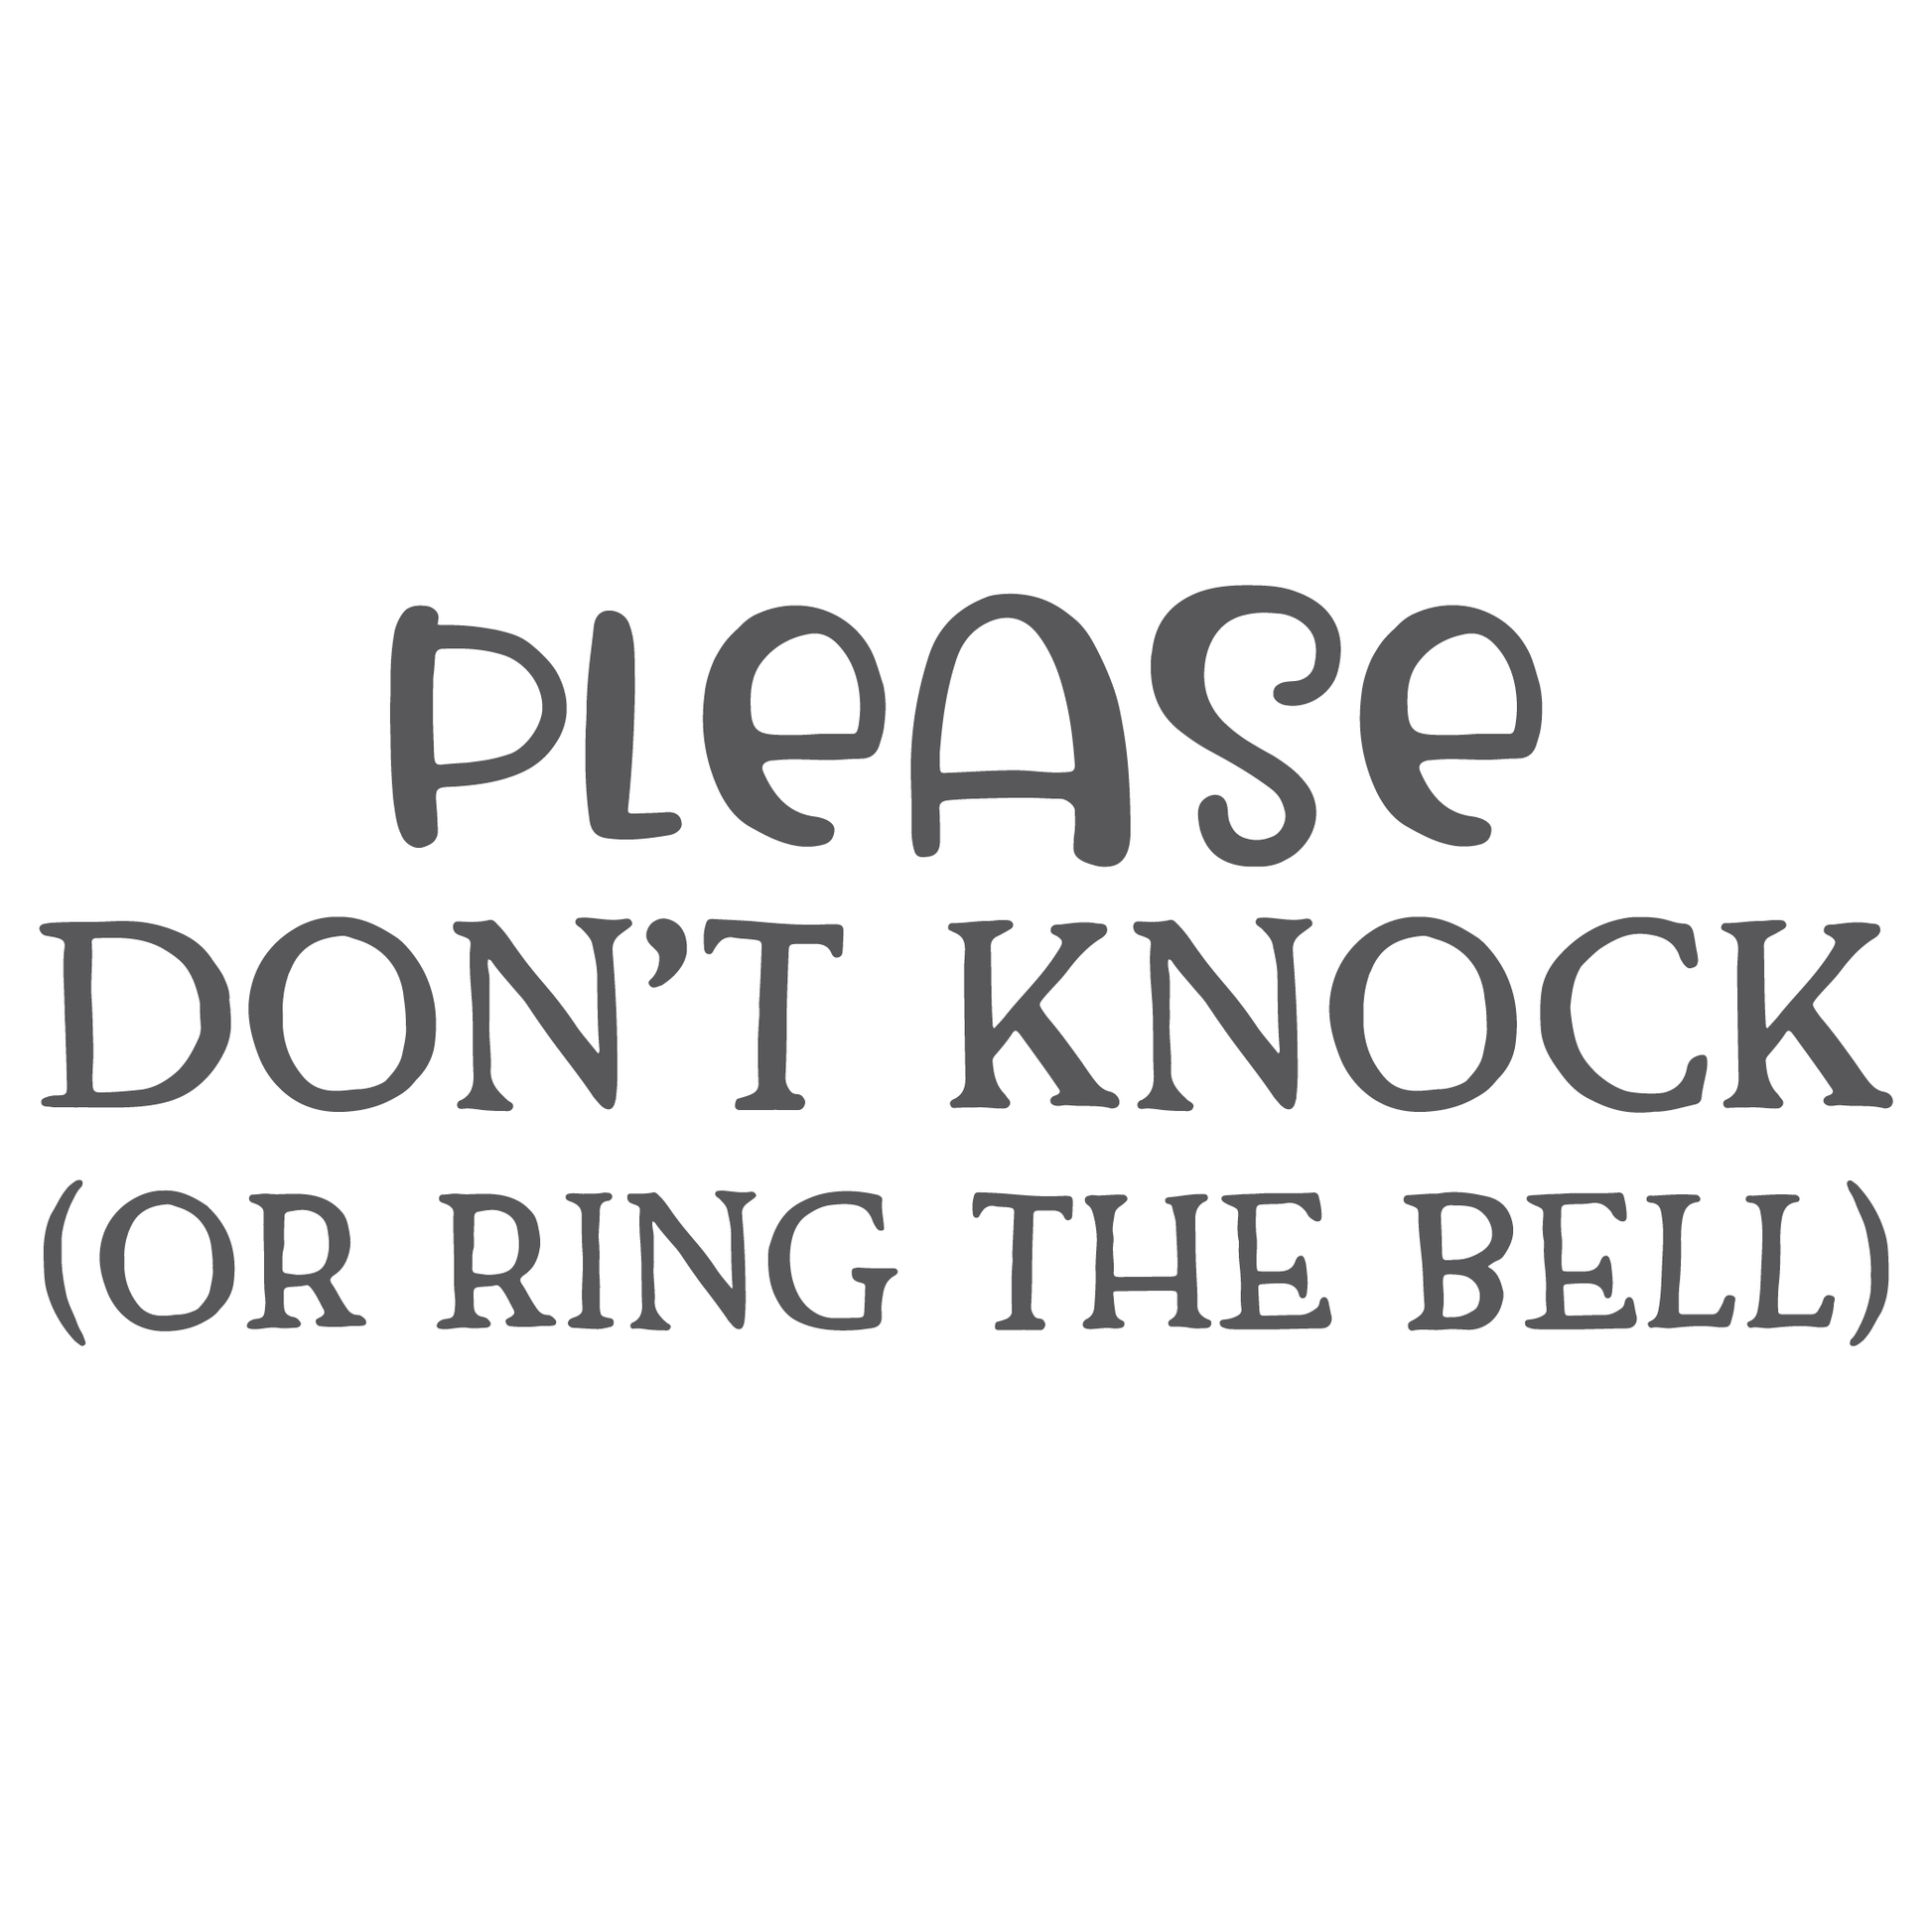 ShopVinylDesignStore.com Please Do Not Knock or Ring The Bell Wide Shop Vinyl Design decals stickers